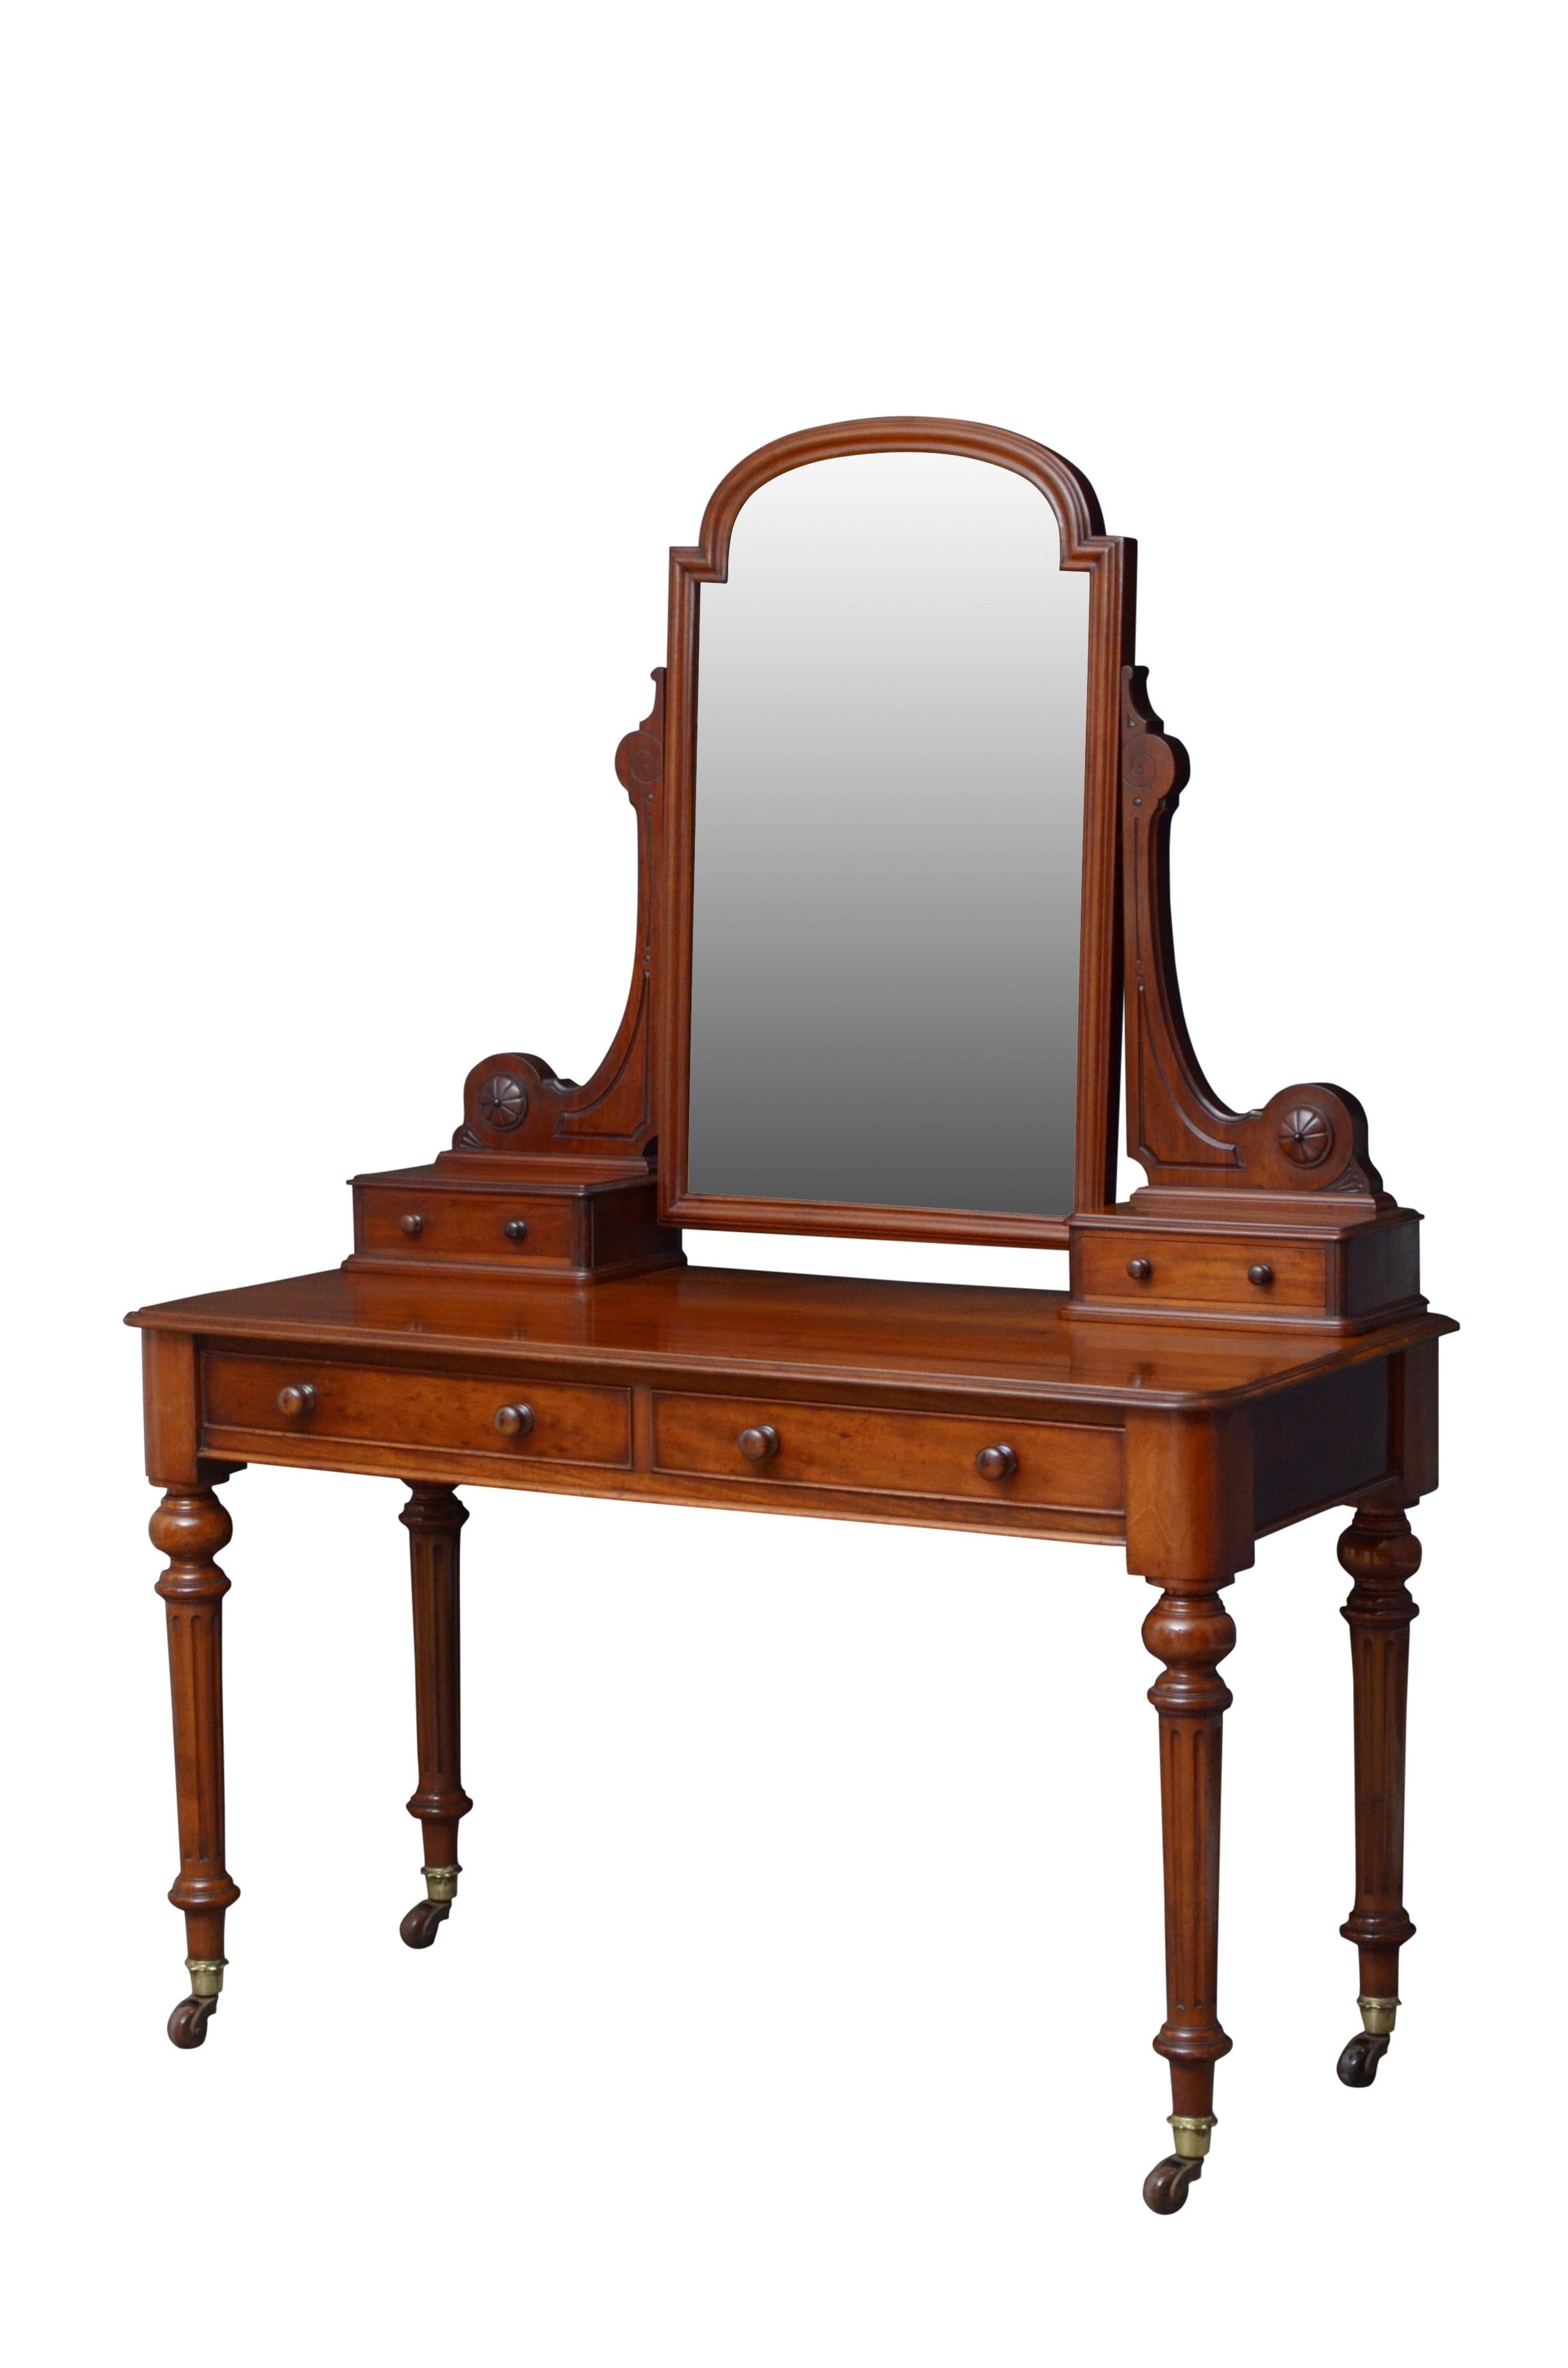 Fine quality Victorian dressing table in mahogany, having a new mirror in moulded and arched frame in carved supports terminating in jewellery drawers above an attractive figured mahogany top with moulded edge and 2 oak lined drawers, all fitted